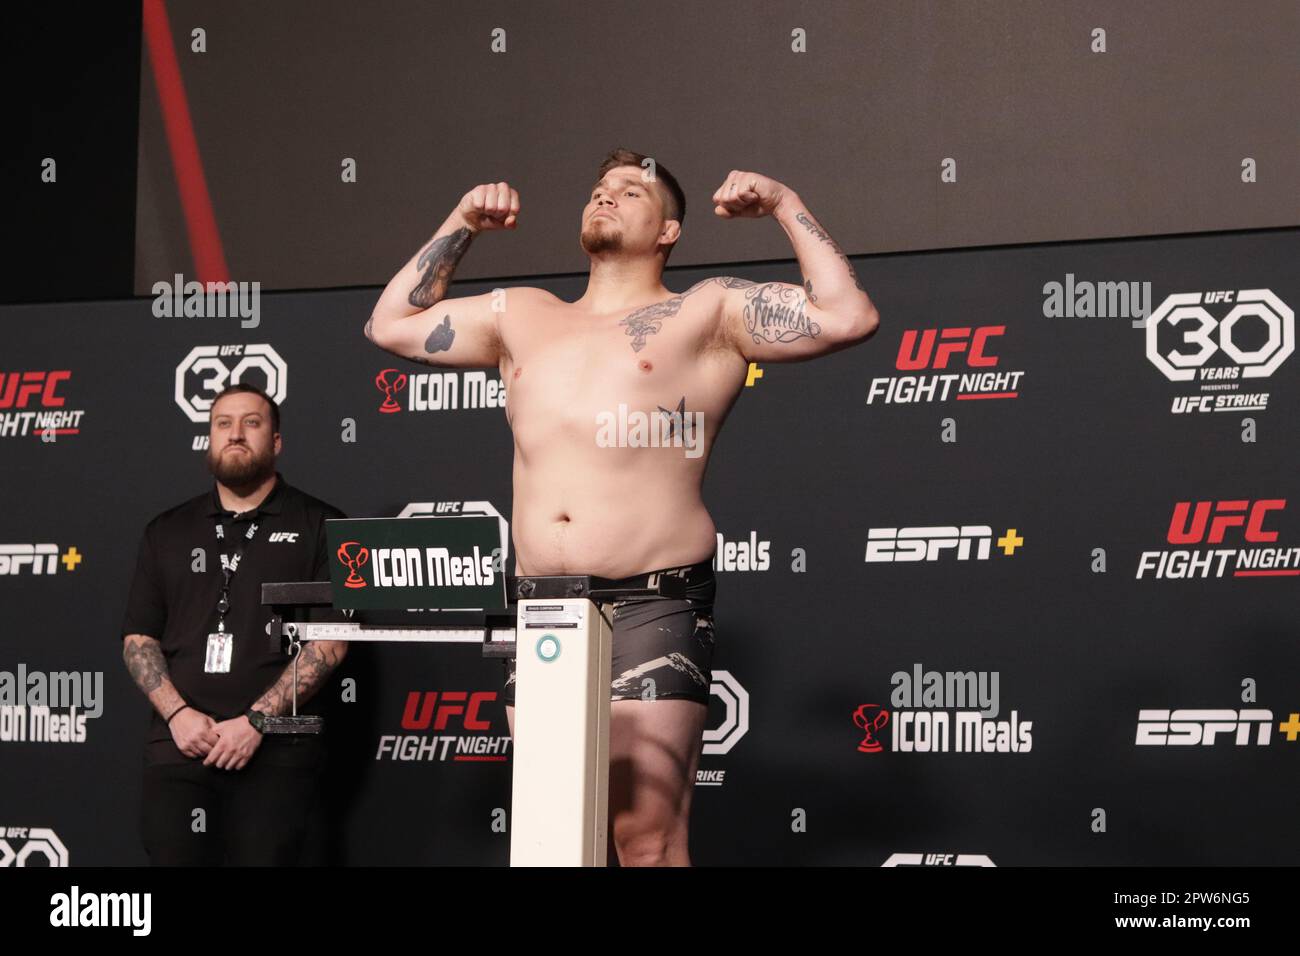 Las Vegas Nv April 28 Jake Collier Poses On The Scale During The Ufc Vegas 72 Weigh In At 